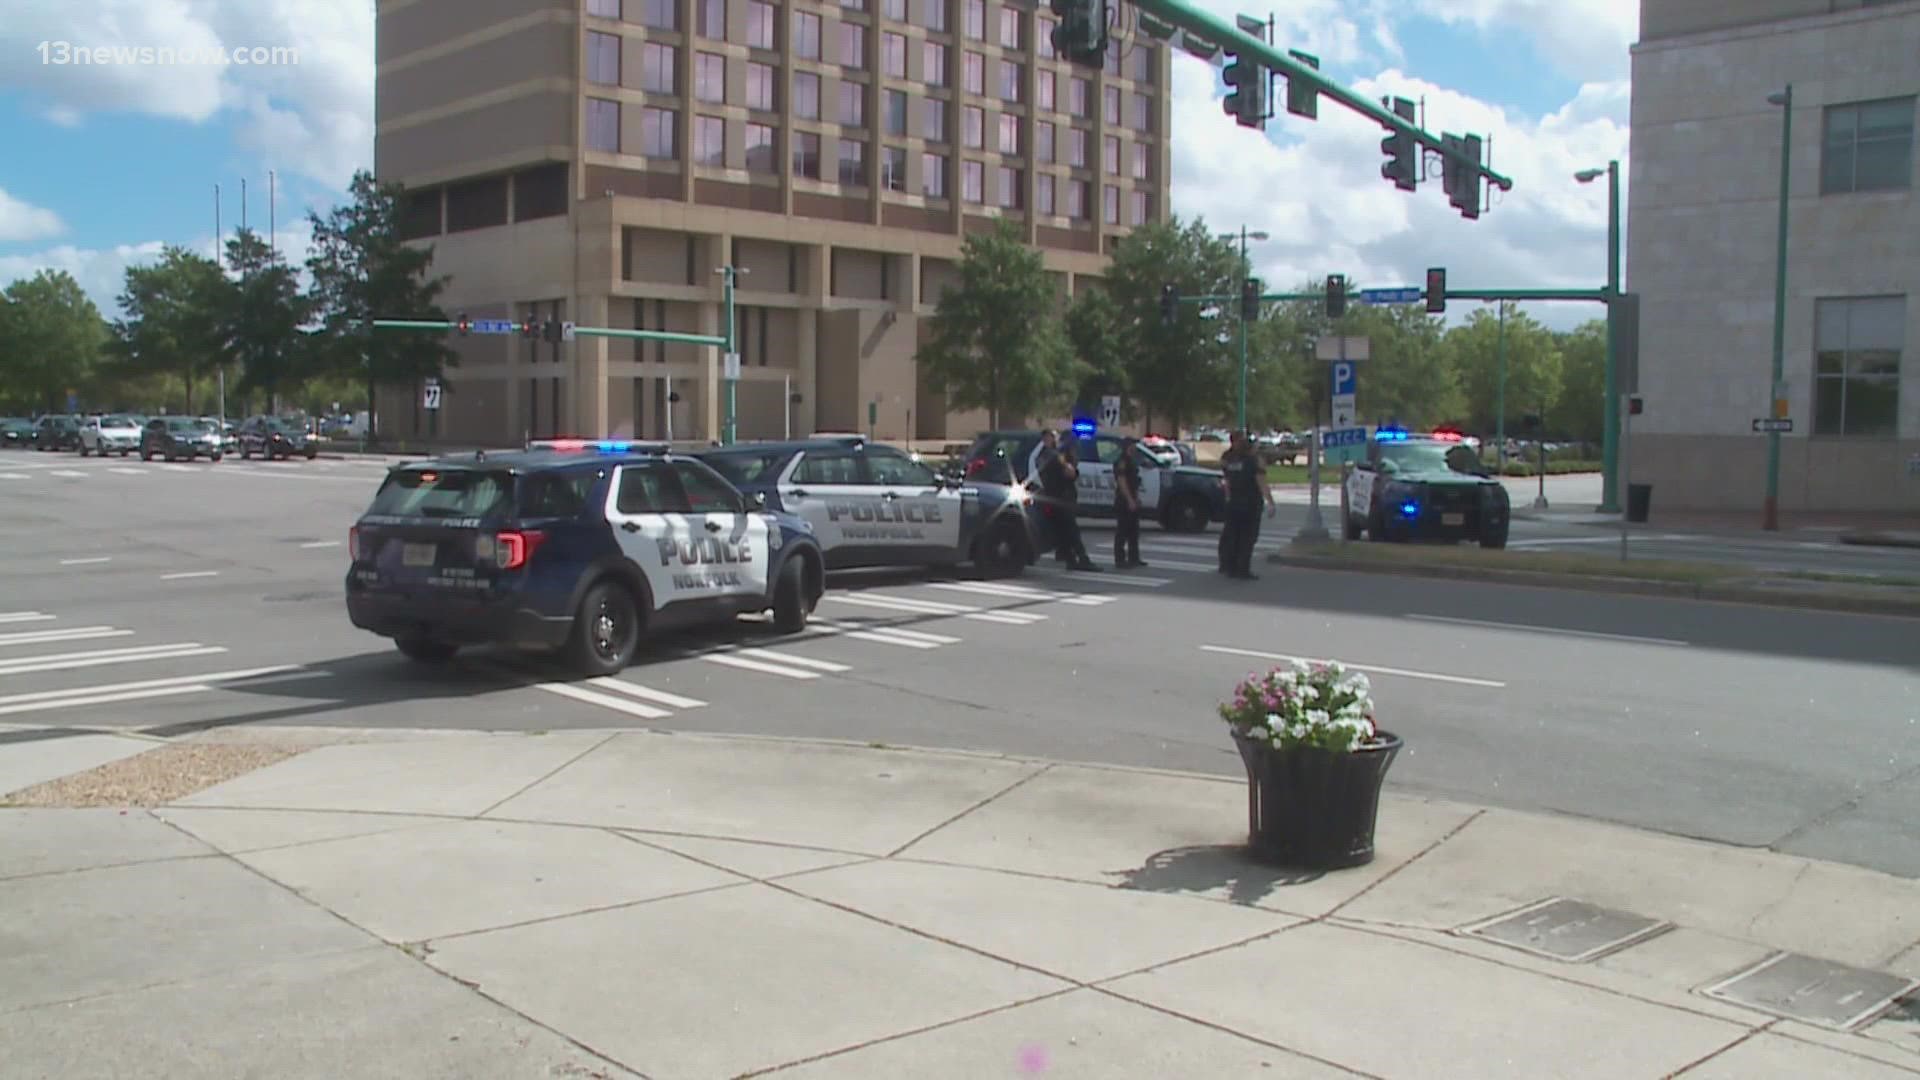 Norfolk police are asking people to avoid the area of the city's courthouse due to a bomb threat. Officers are shutting down roads around the building.